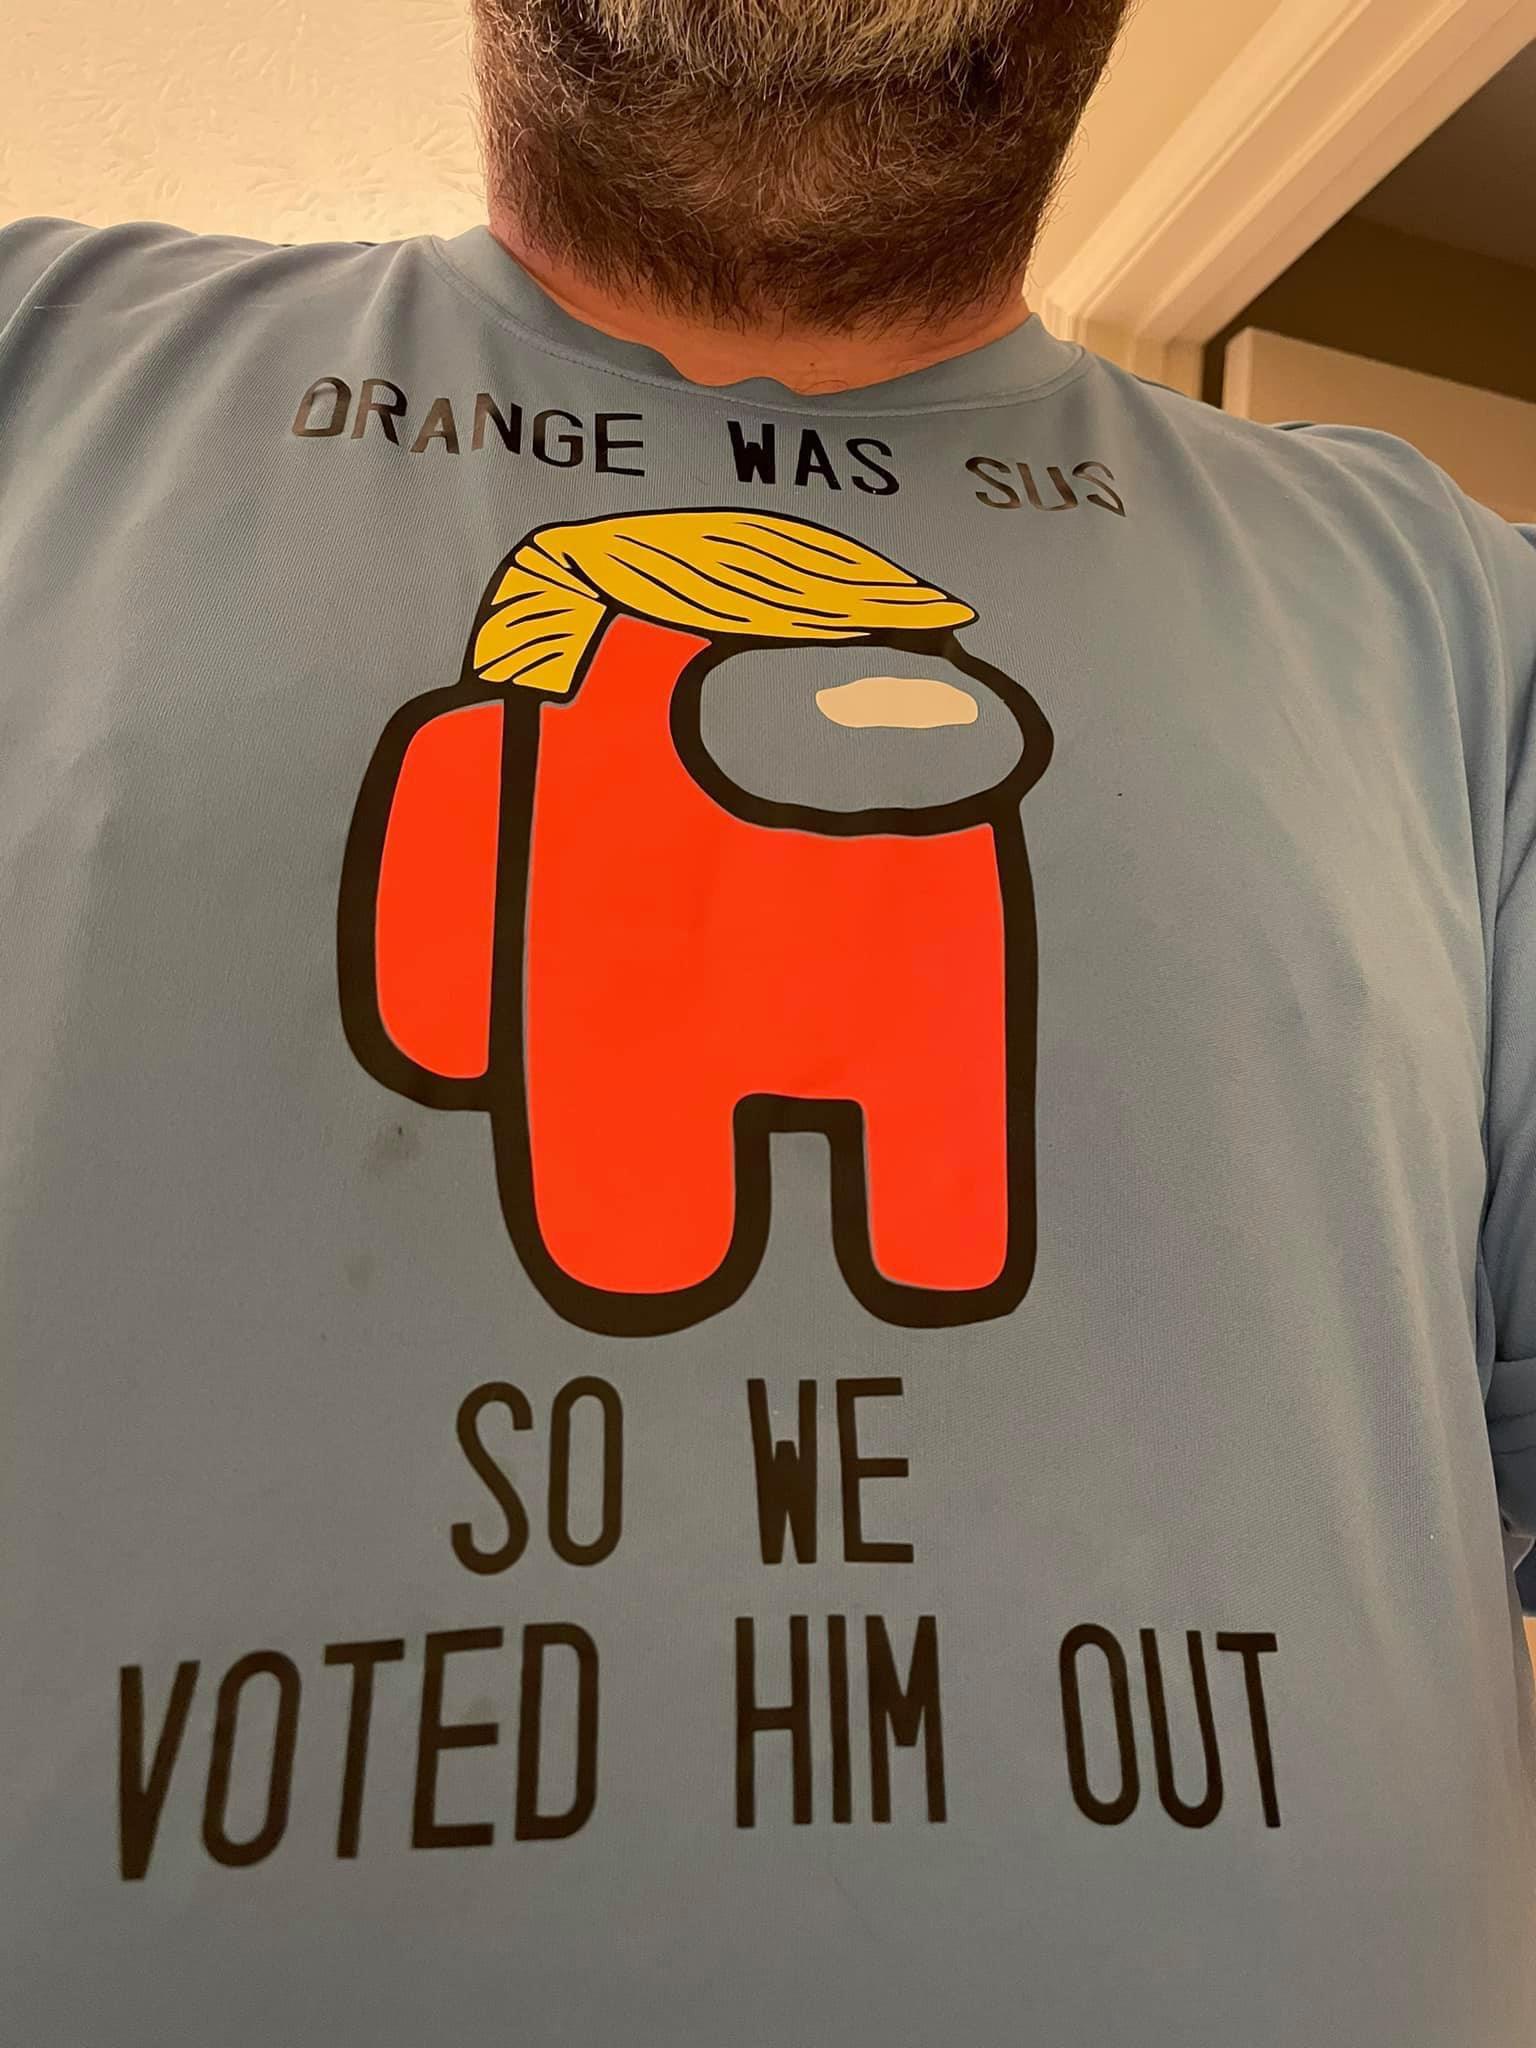 t shirt - Orange Was Sus 29 So We Voted Him Out